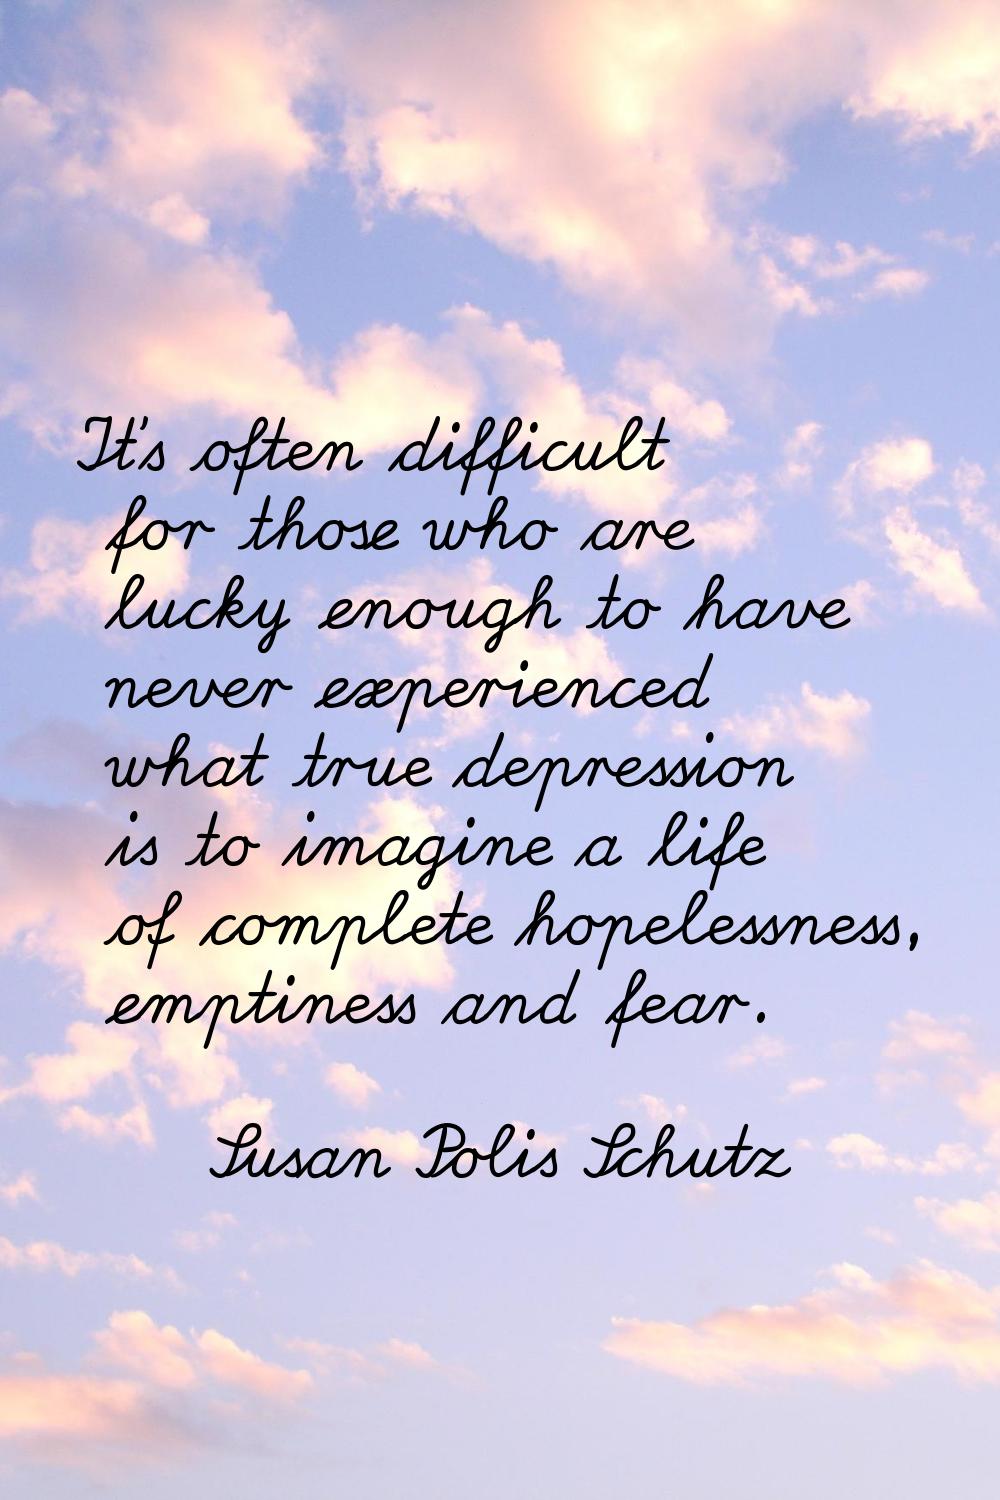 It's often difficult for those who are lucky enough to have never experienced what true depression 